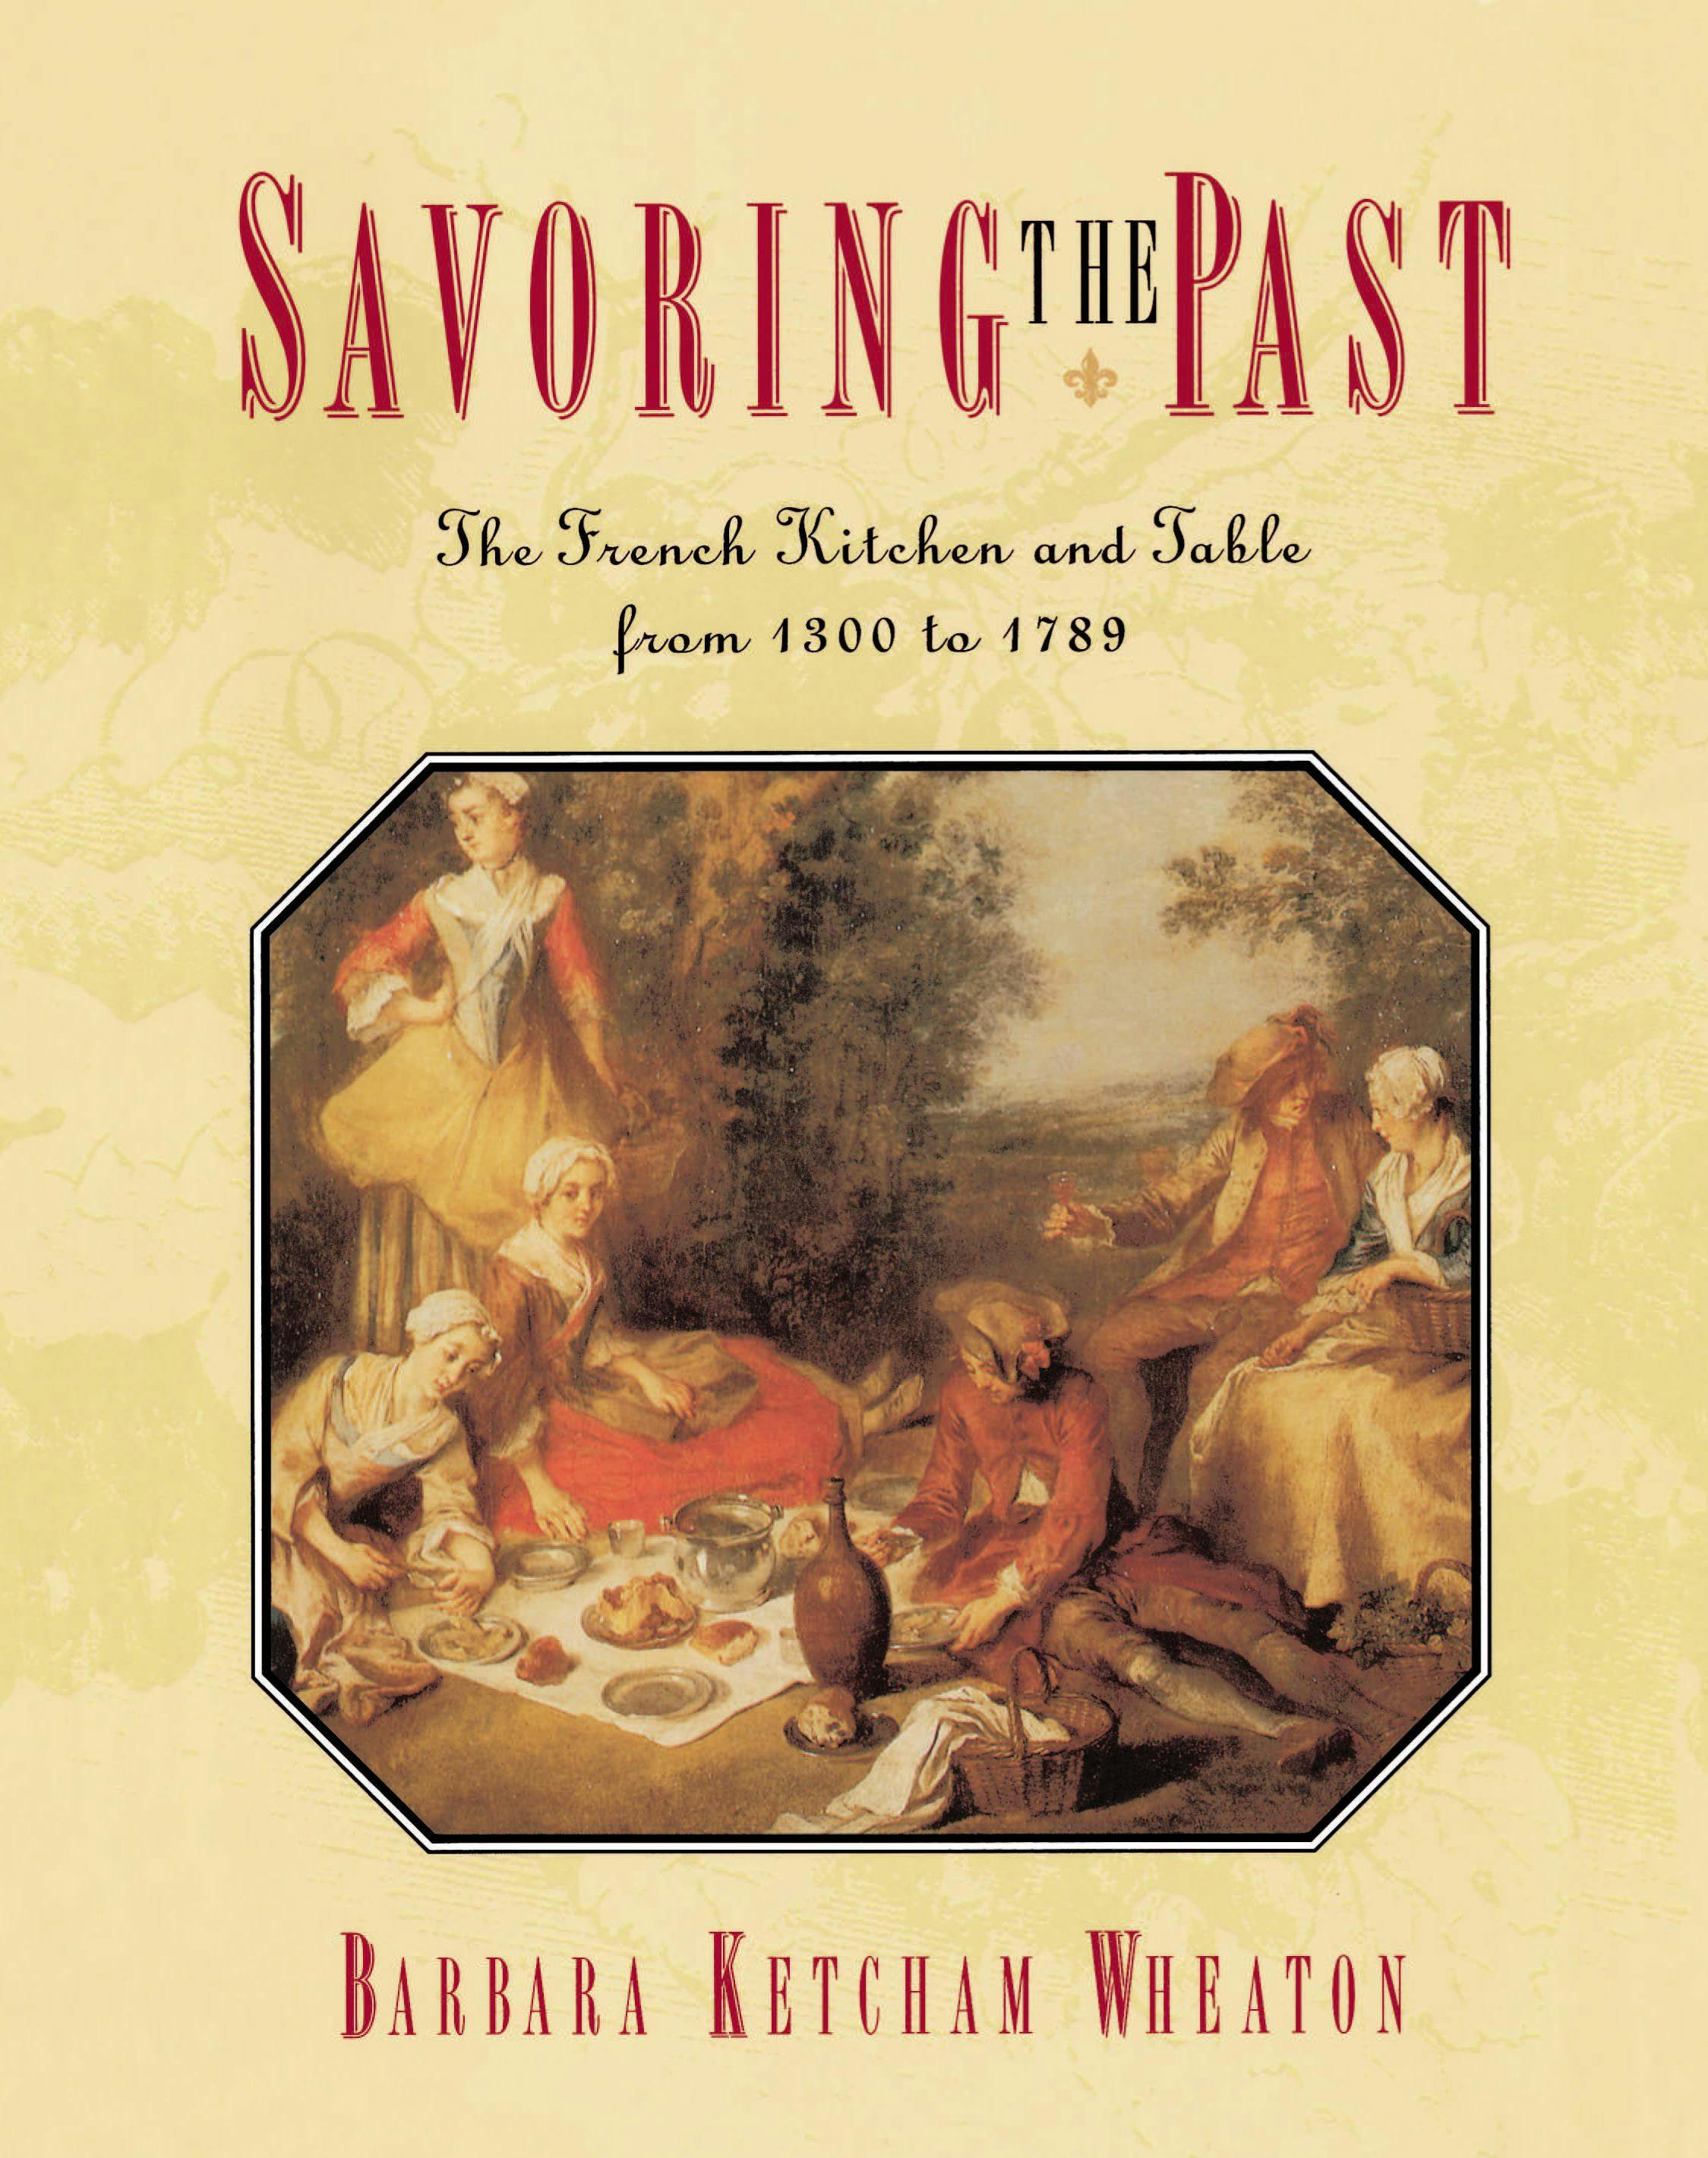 Savoring the Past: The French Kitchen and Table from 1300 to 1789 - Barbara Ketcham Wheaton